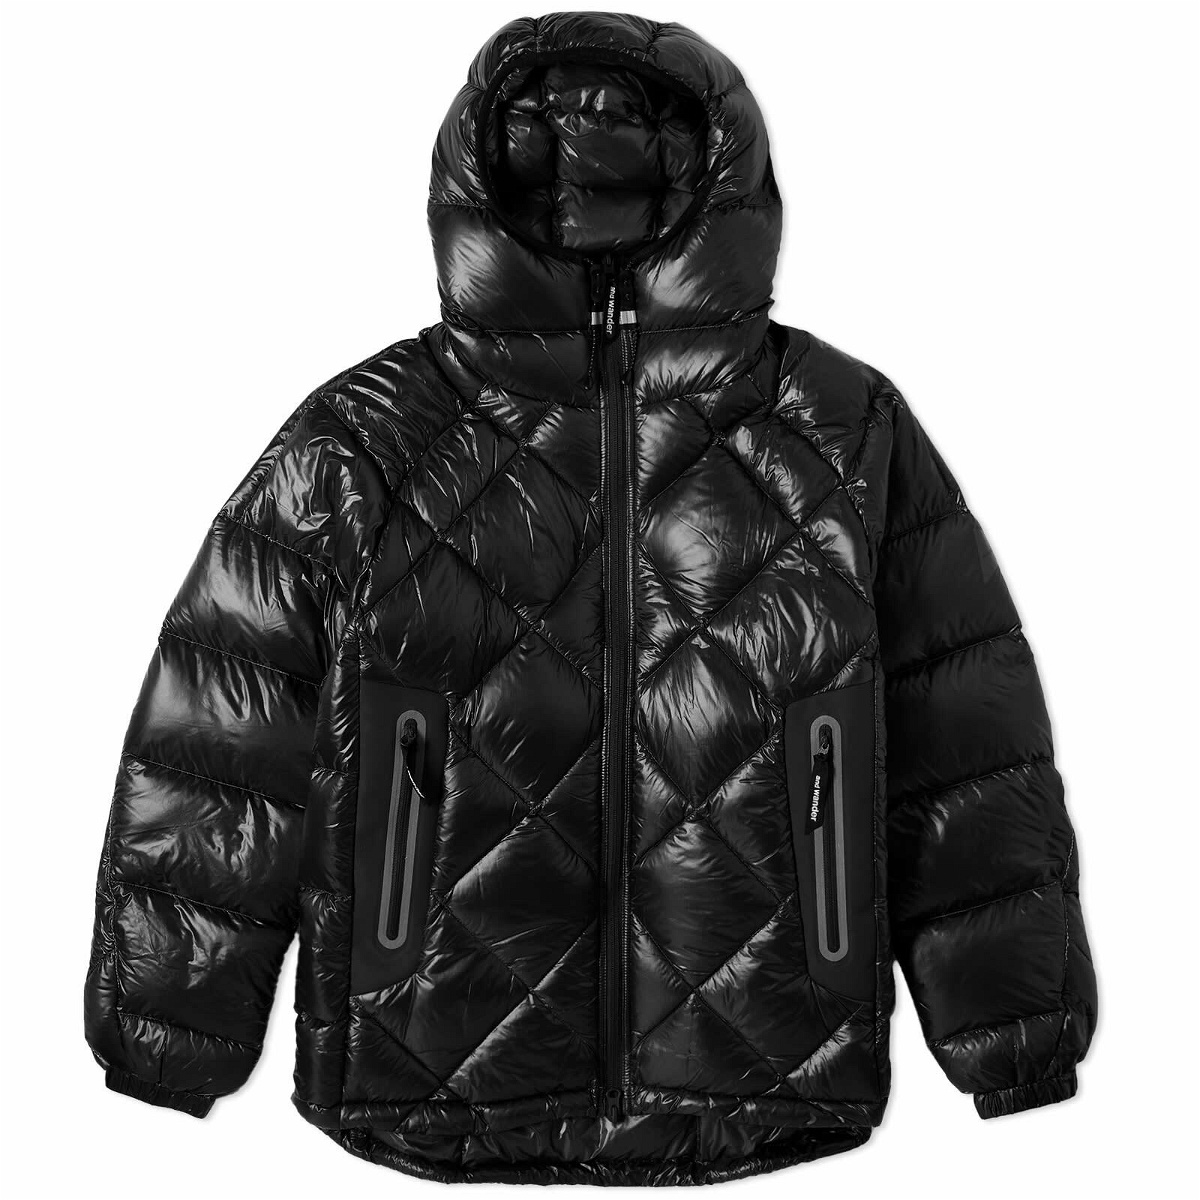 And Wander Men's Diamond Stitch Down Hooded Jacket in Black and Wander